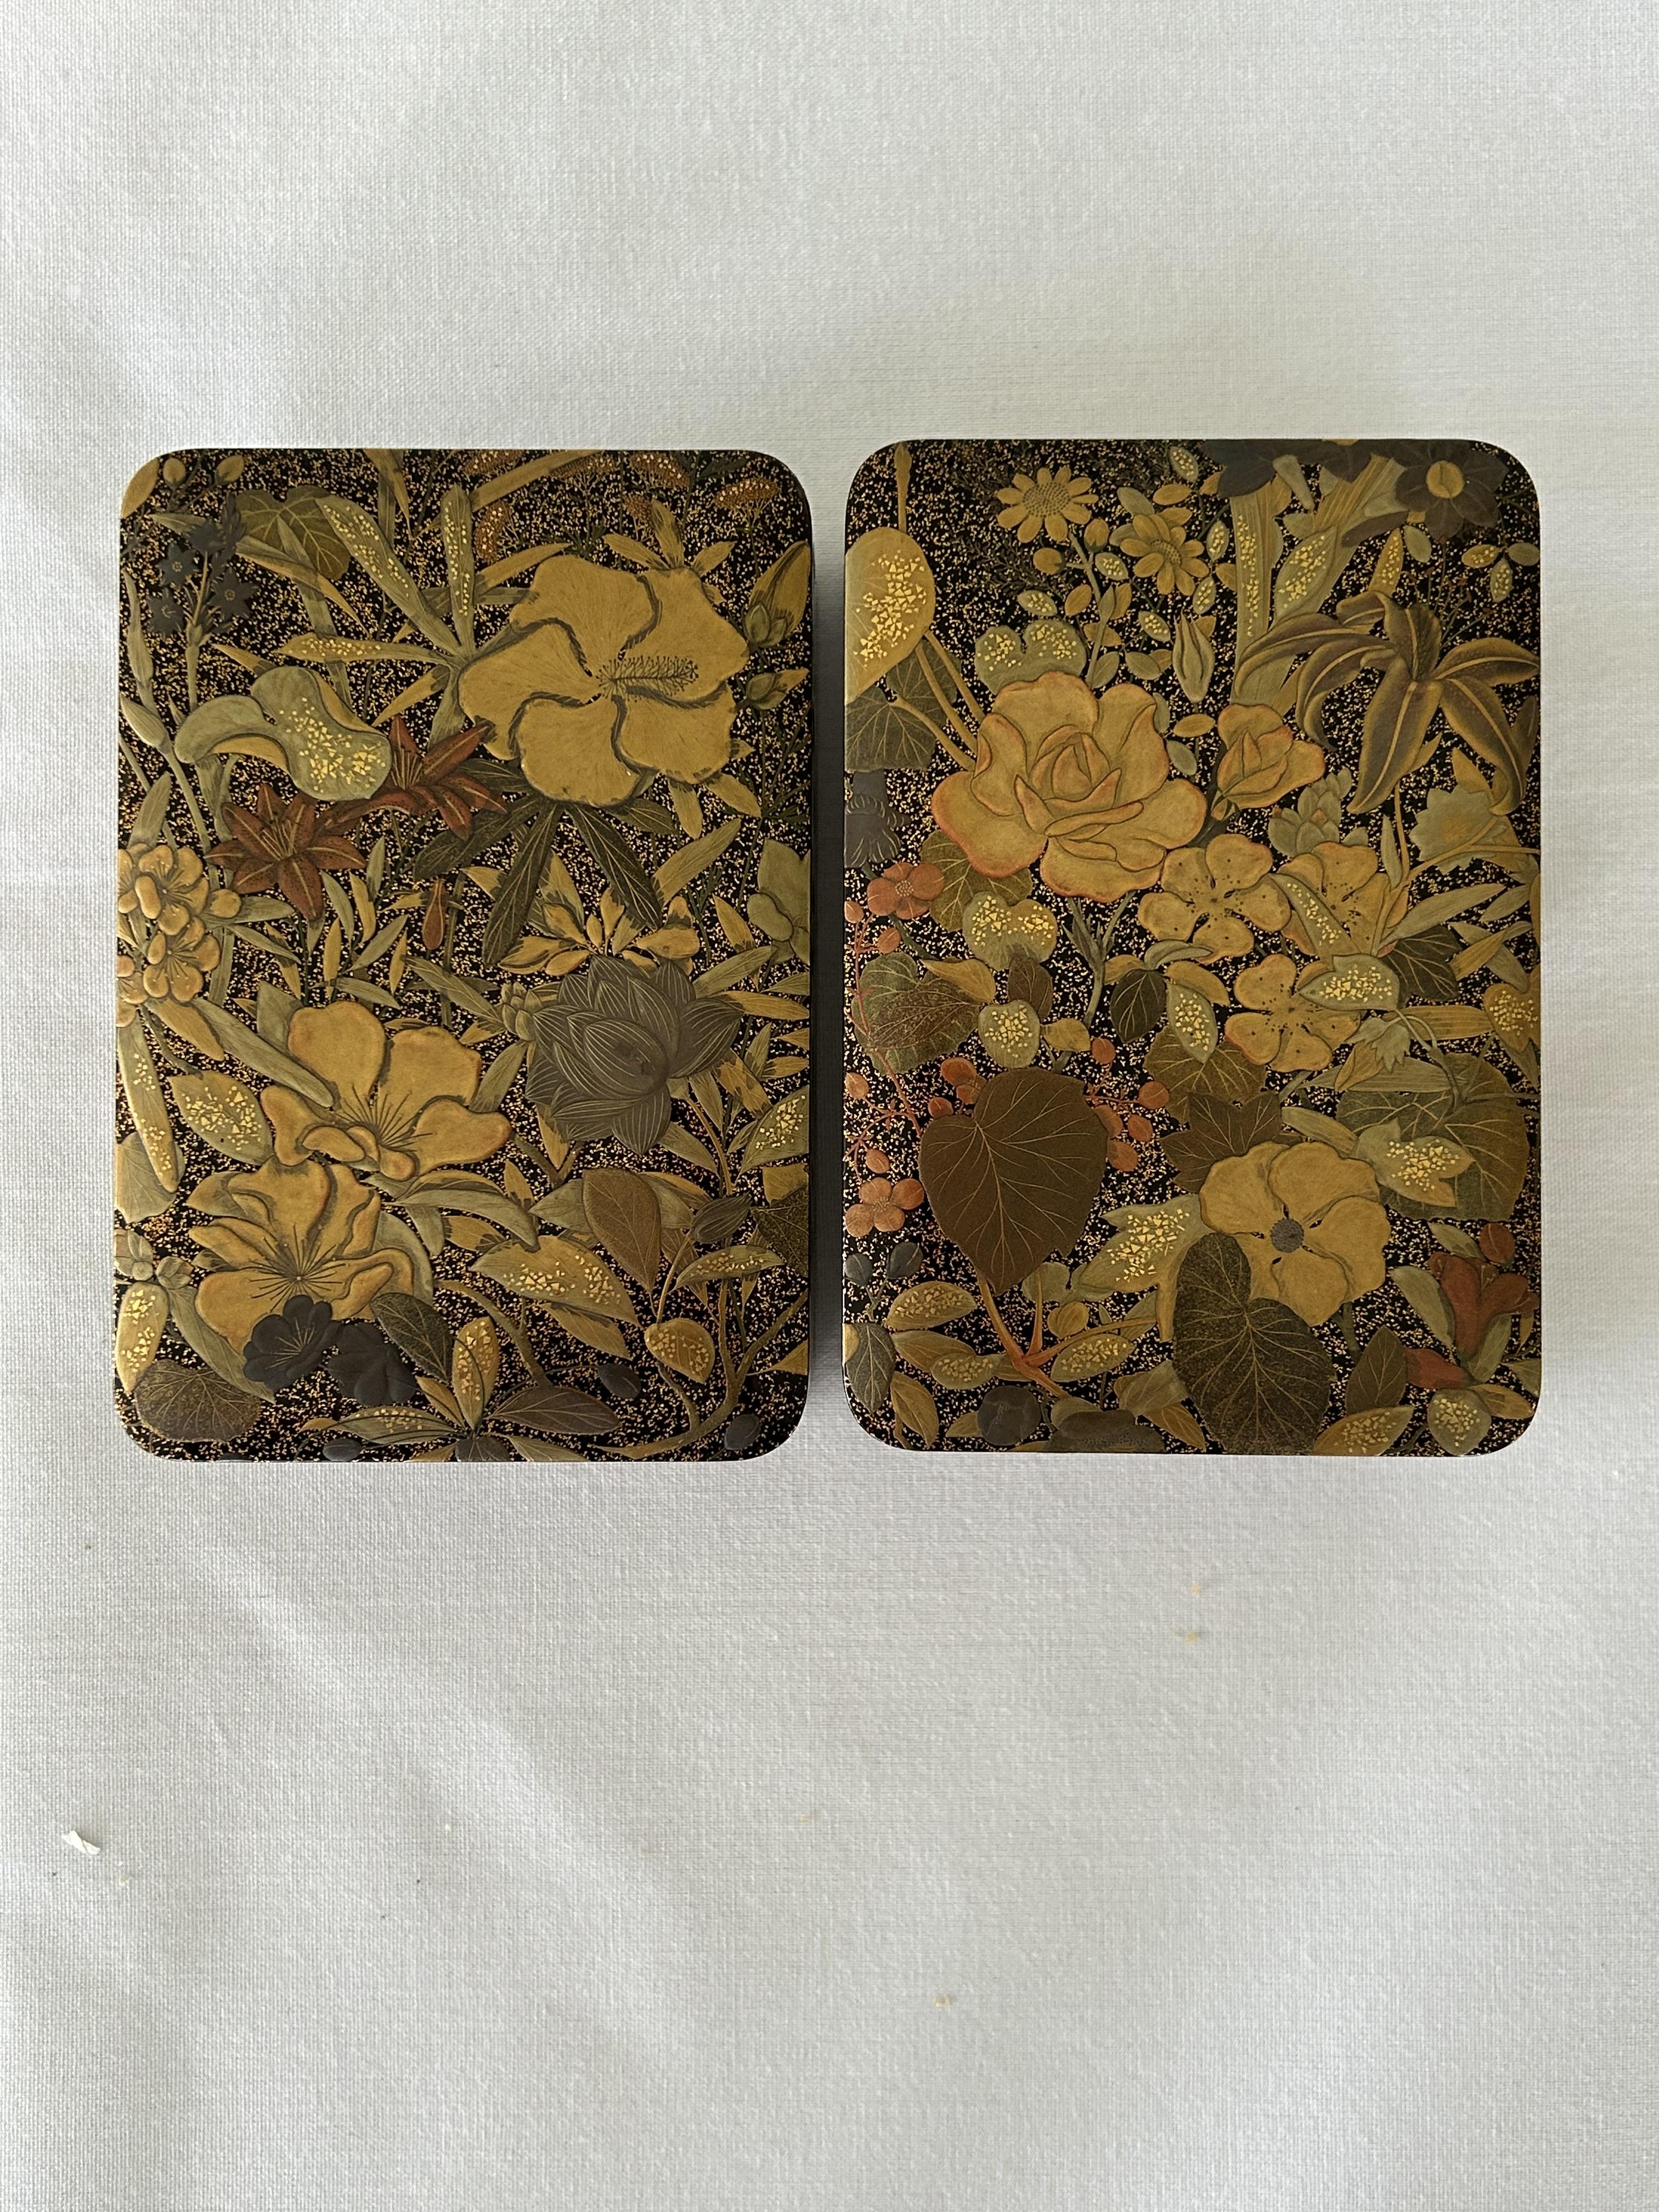 A 19th century Japanese gold lacquer box with interior tray and two boxes - Image 9 of 23